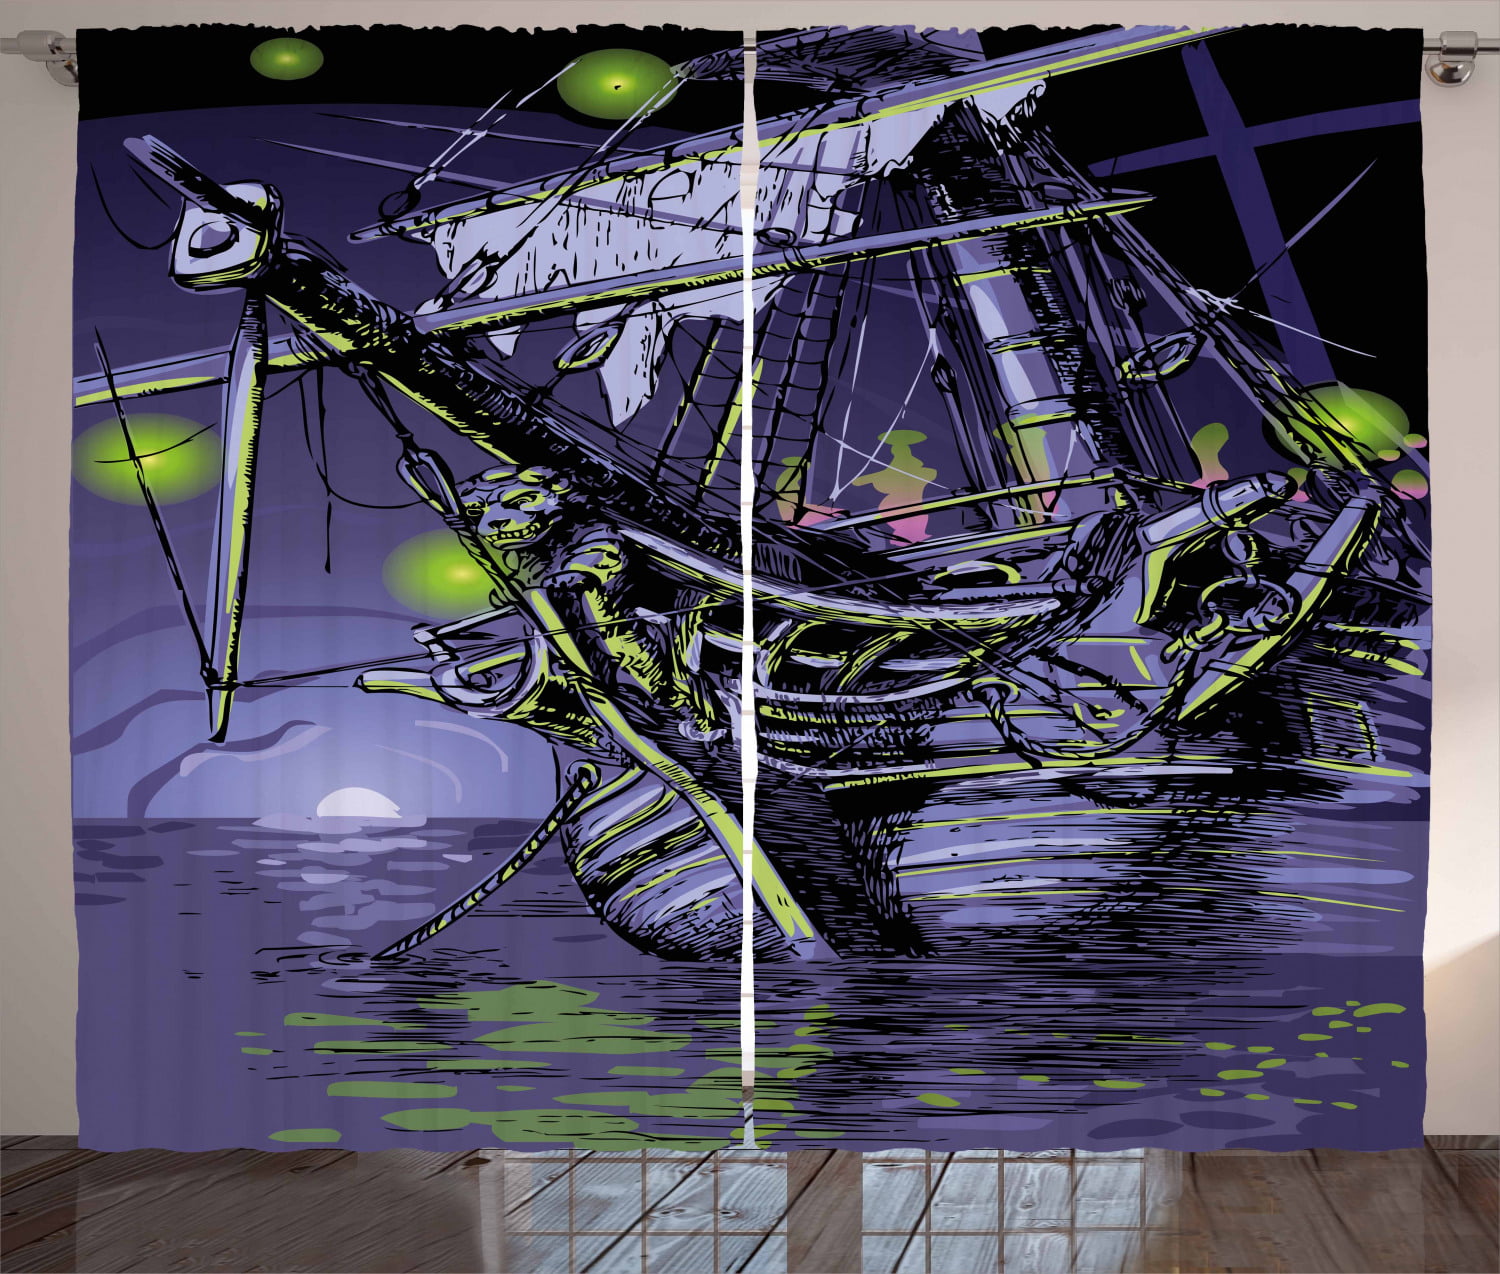 2 Panels 3D High Seas Pirate Ship Scenery Window Curtains Blockout Drapes Fabric 